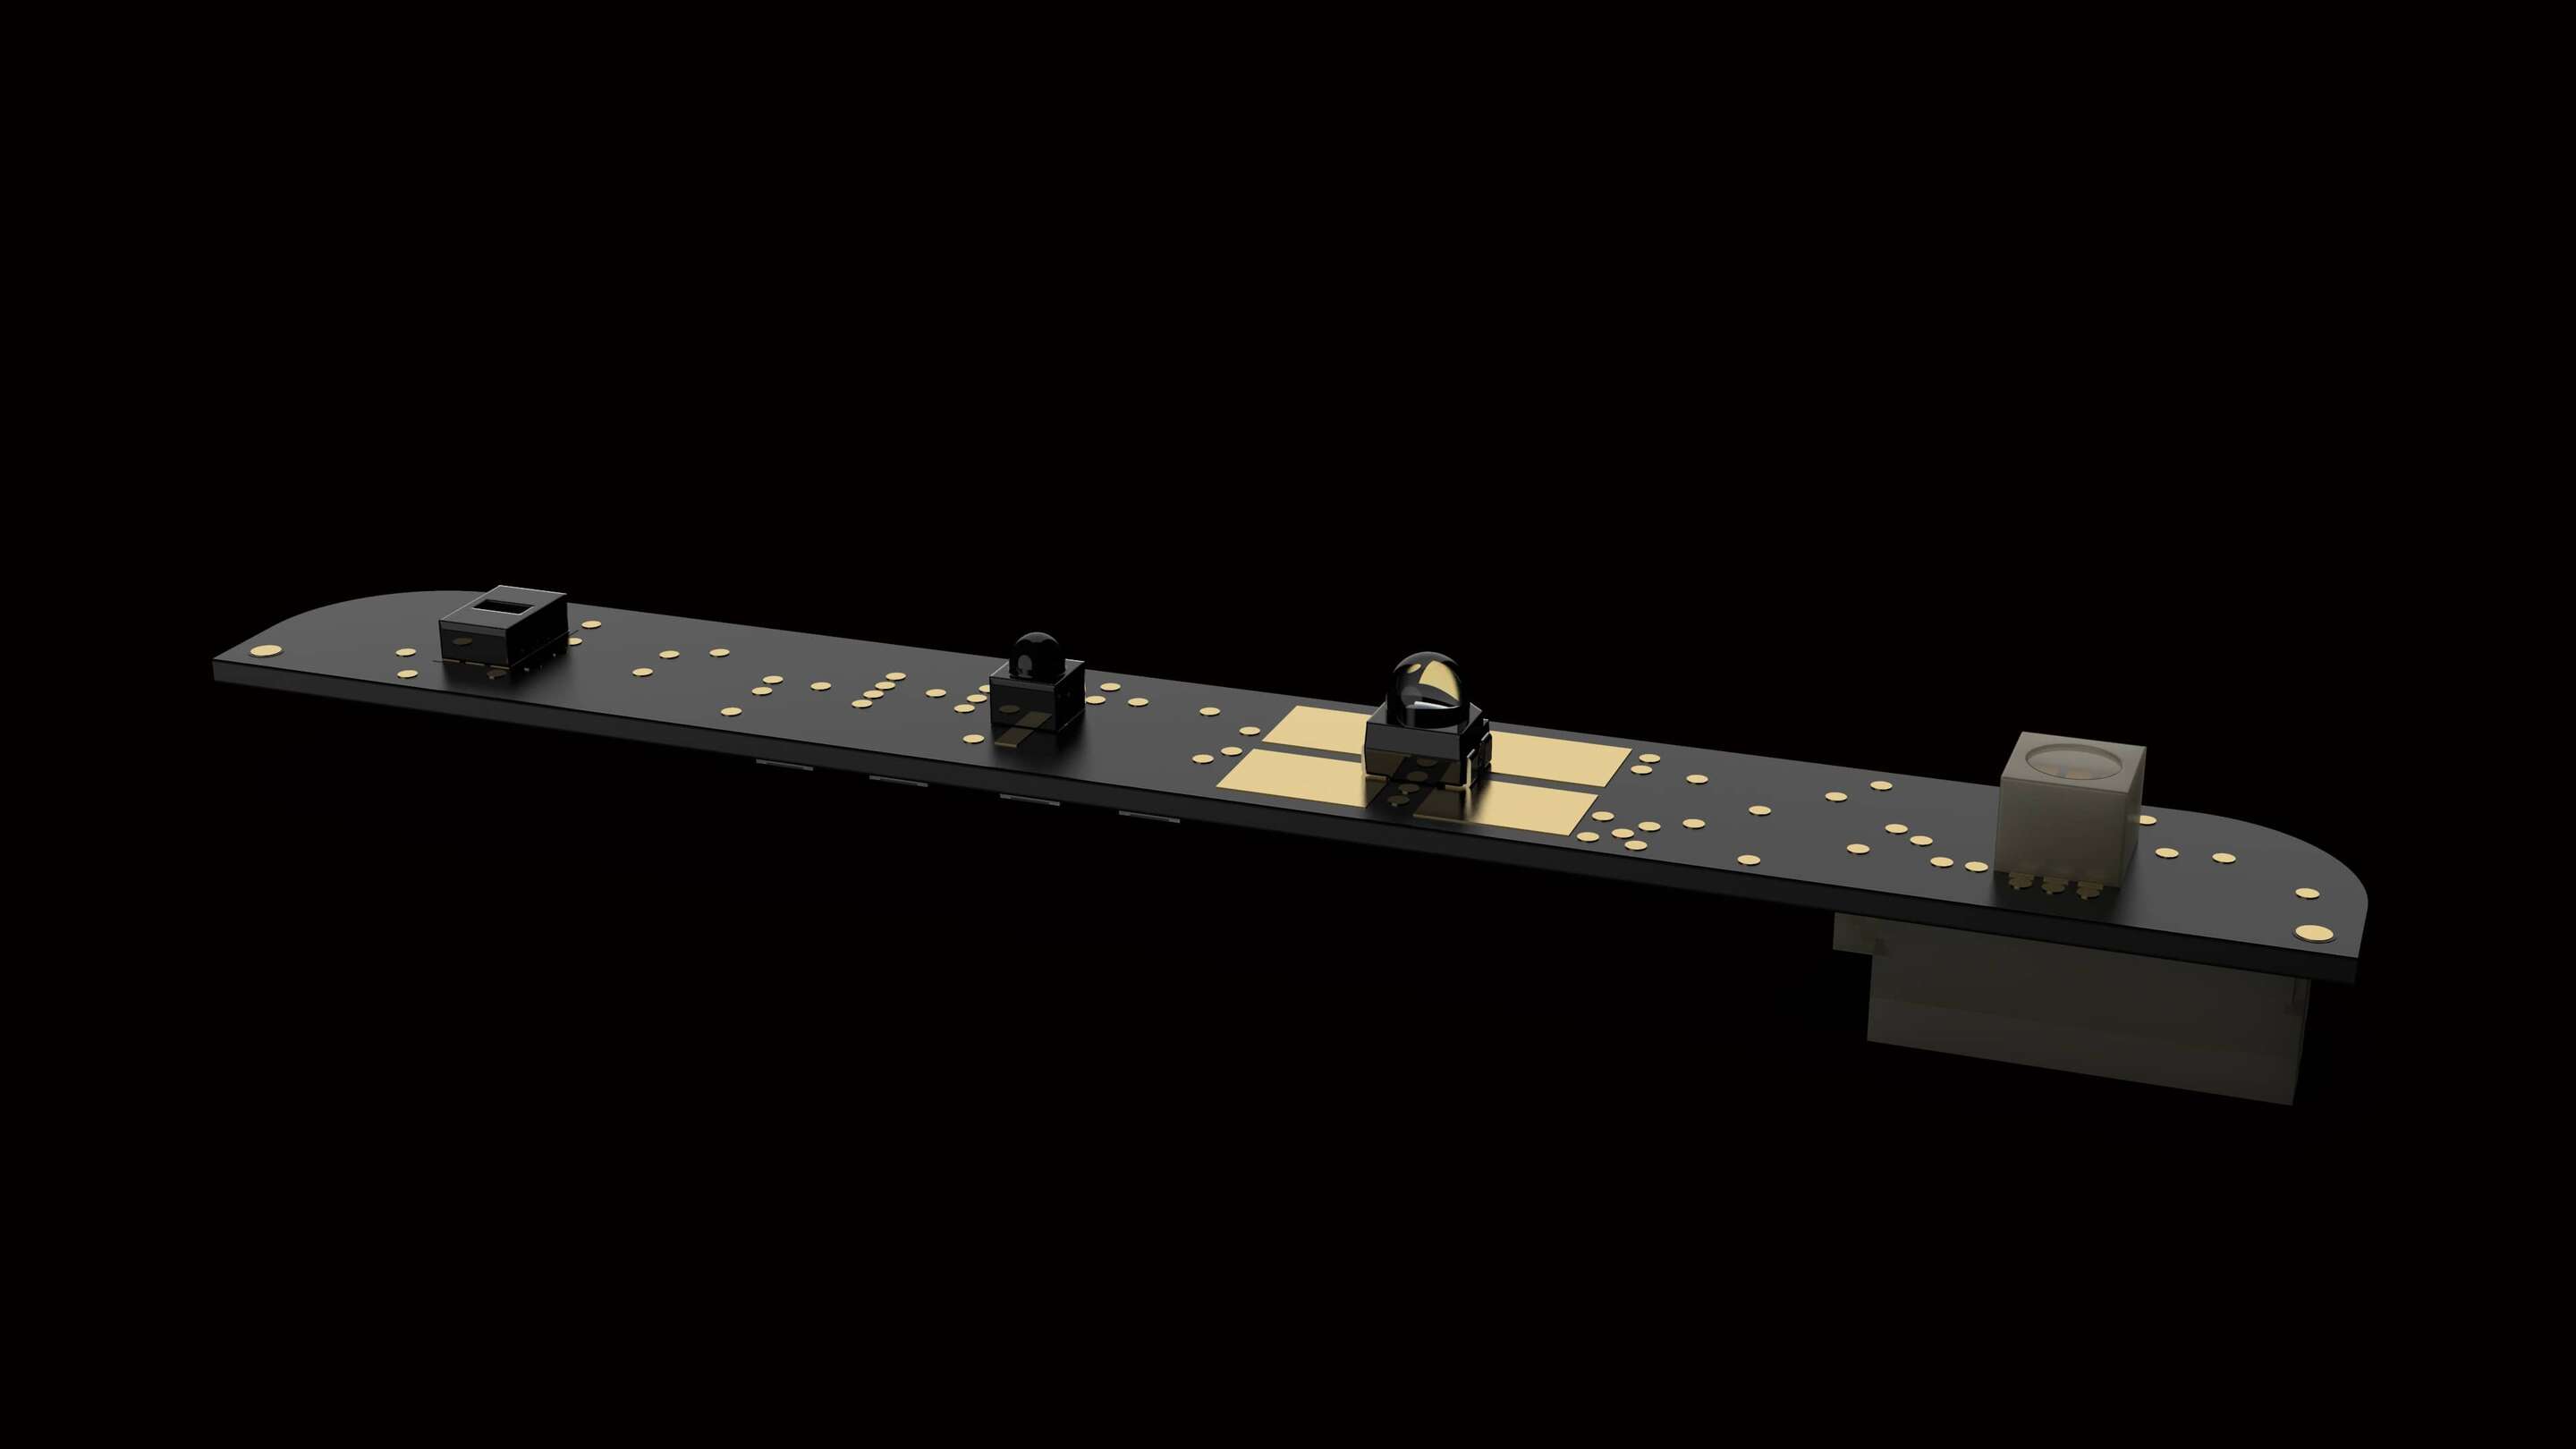 Industrial Monitor - Sensor bar a black and gold object with a black background